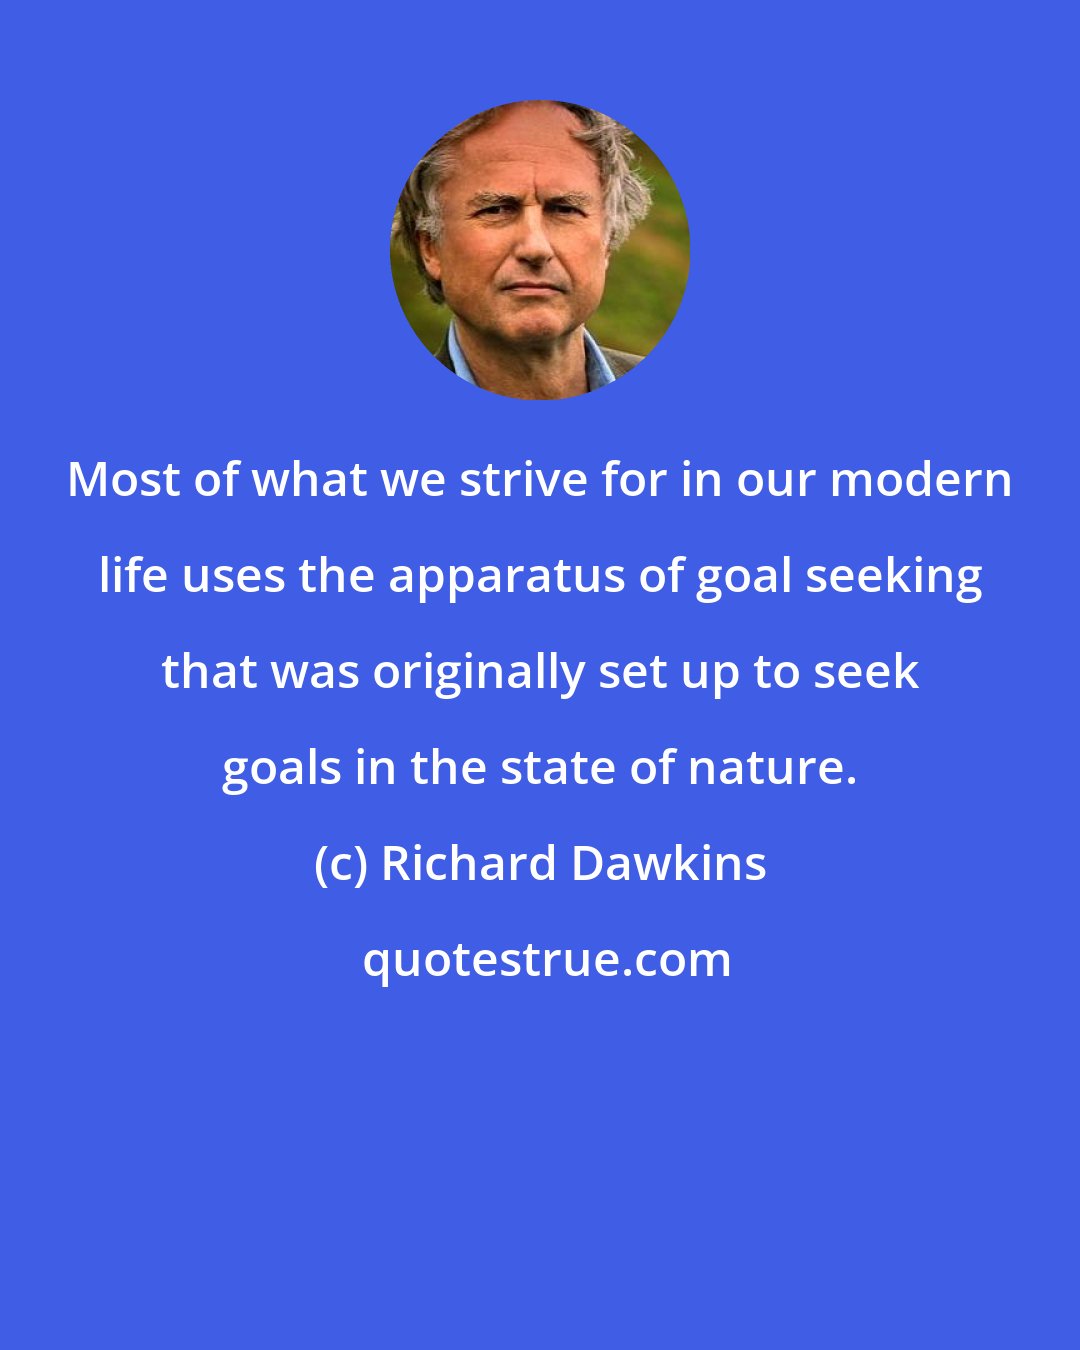 Richard Dawkins: Most of what we strive for in our modern life uses the apparatus of goal seeking that was originally set up to seek goals in the state of nature.